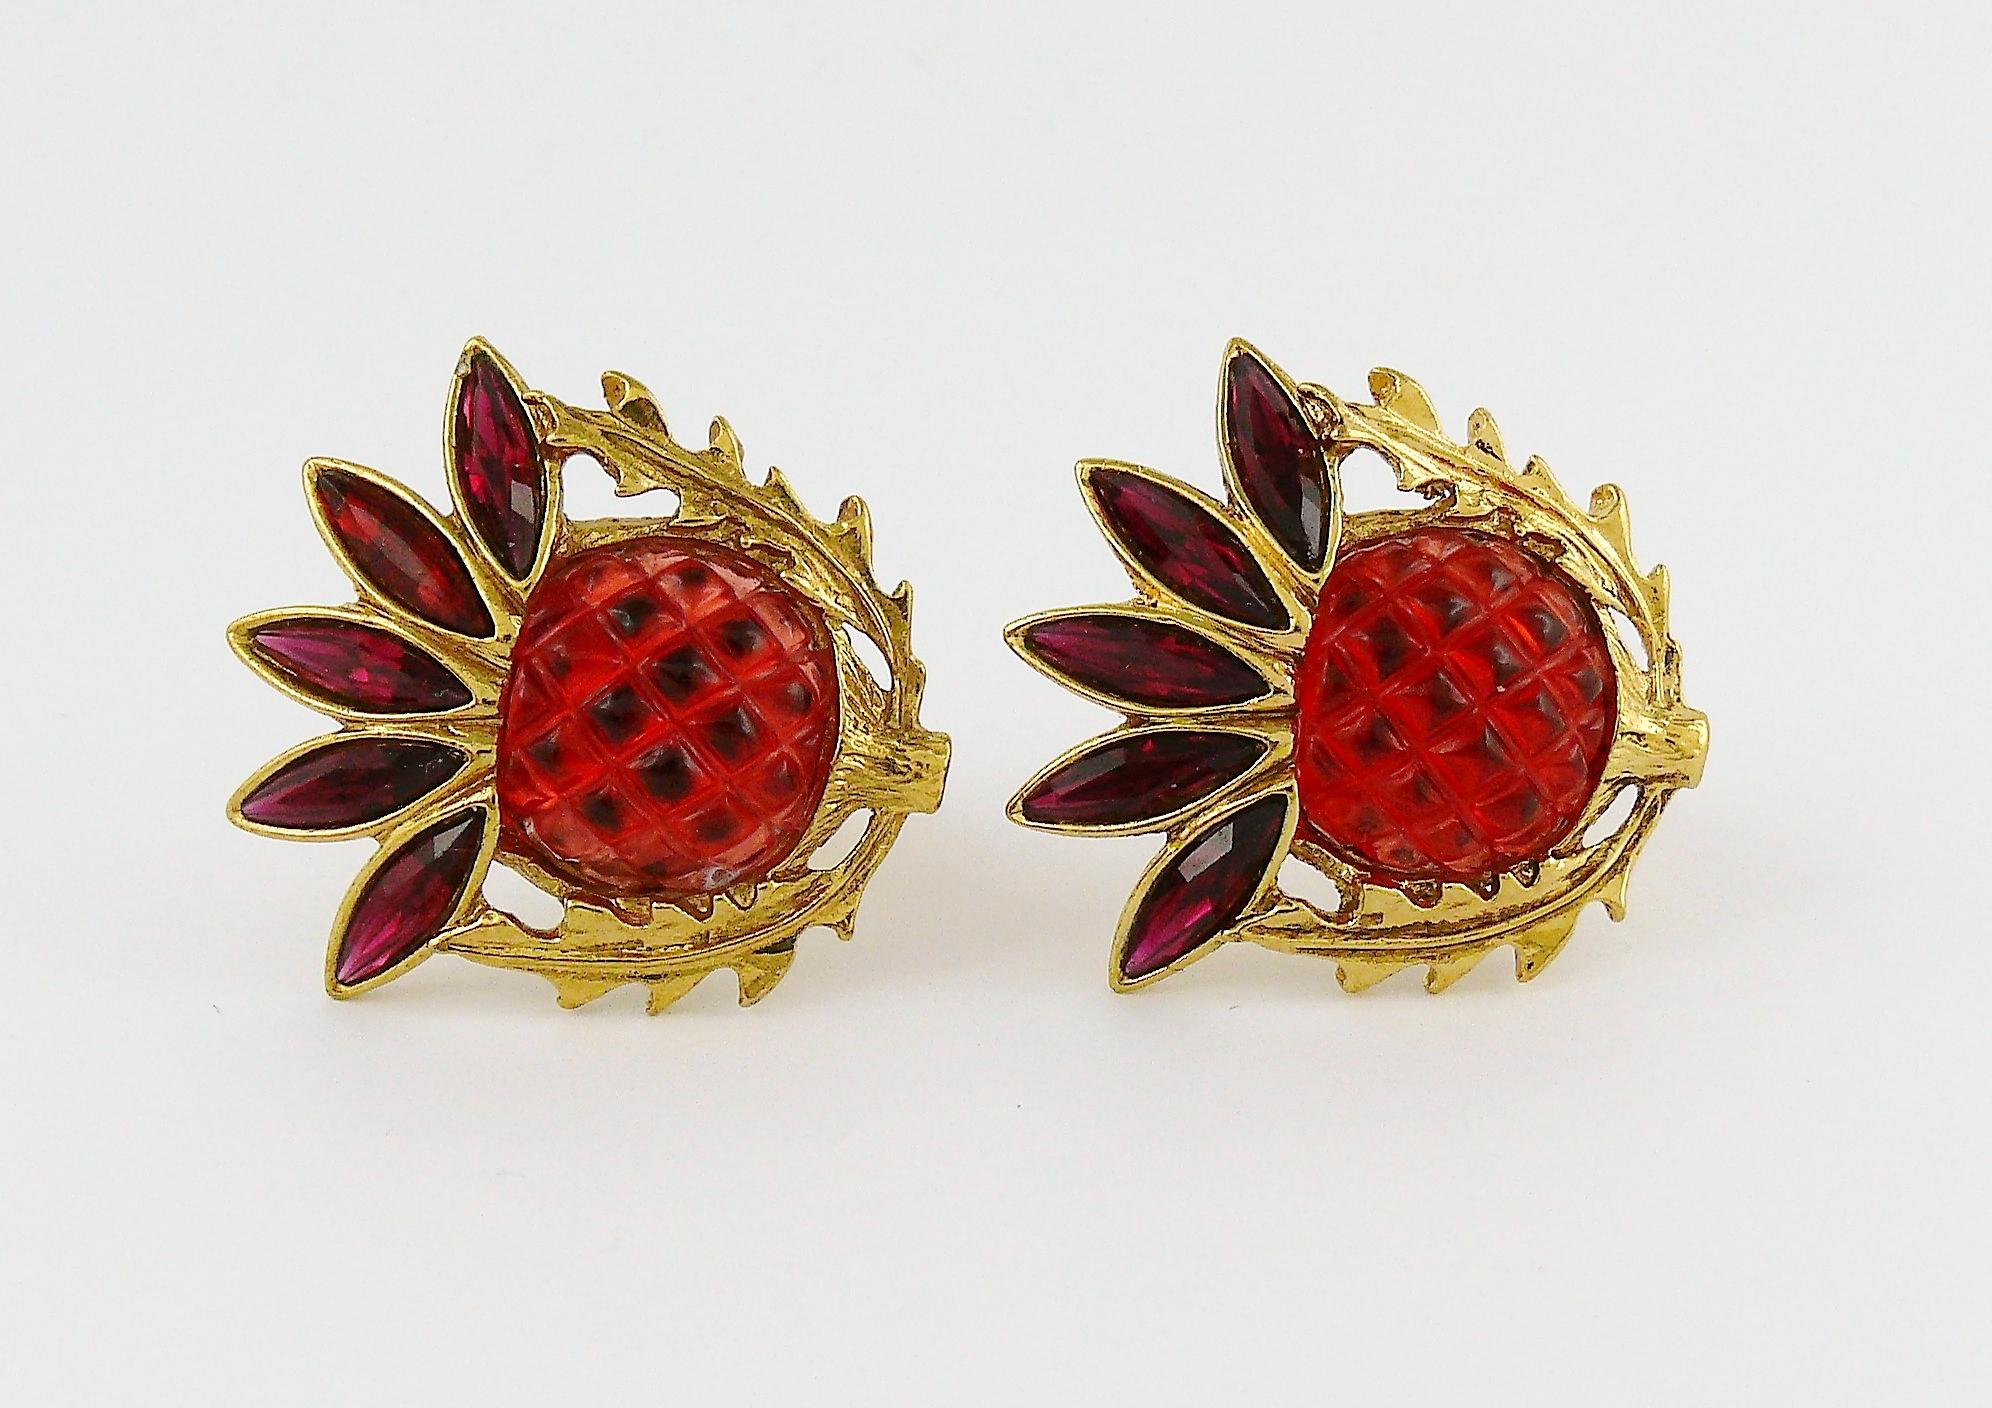 YVES SAINT LAURENT vintage gold toned clip-on earrings featuring a textured red lucite resin thistle with crystals on top.

Embossed YSL Made in France.

Indicative measurements : height approx. 3.2 cm (1.26 inches) / max. width approx. 2.7 cm (1.06